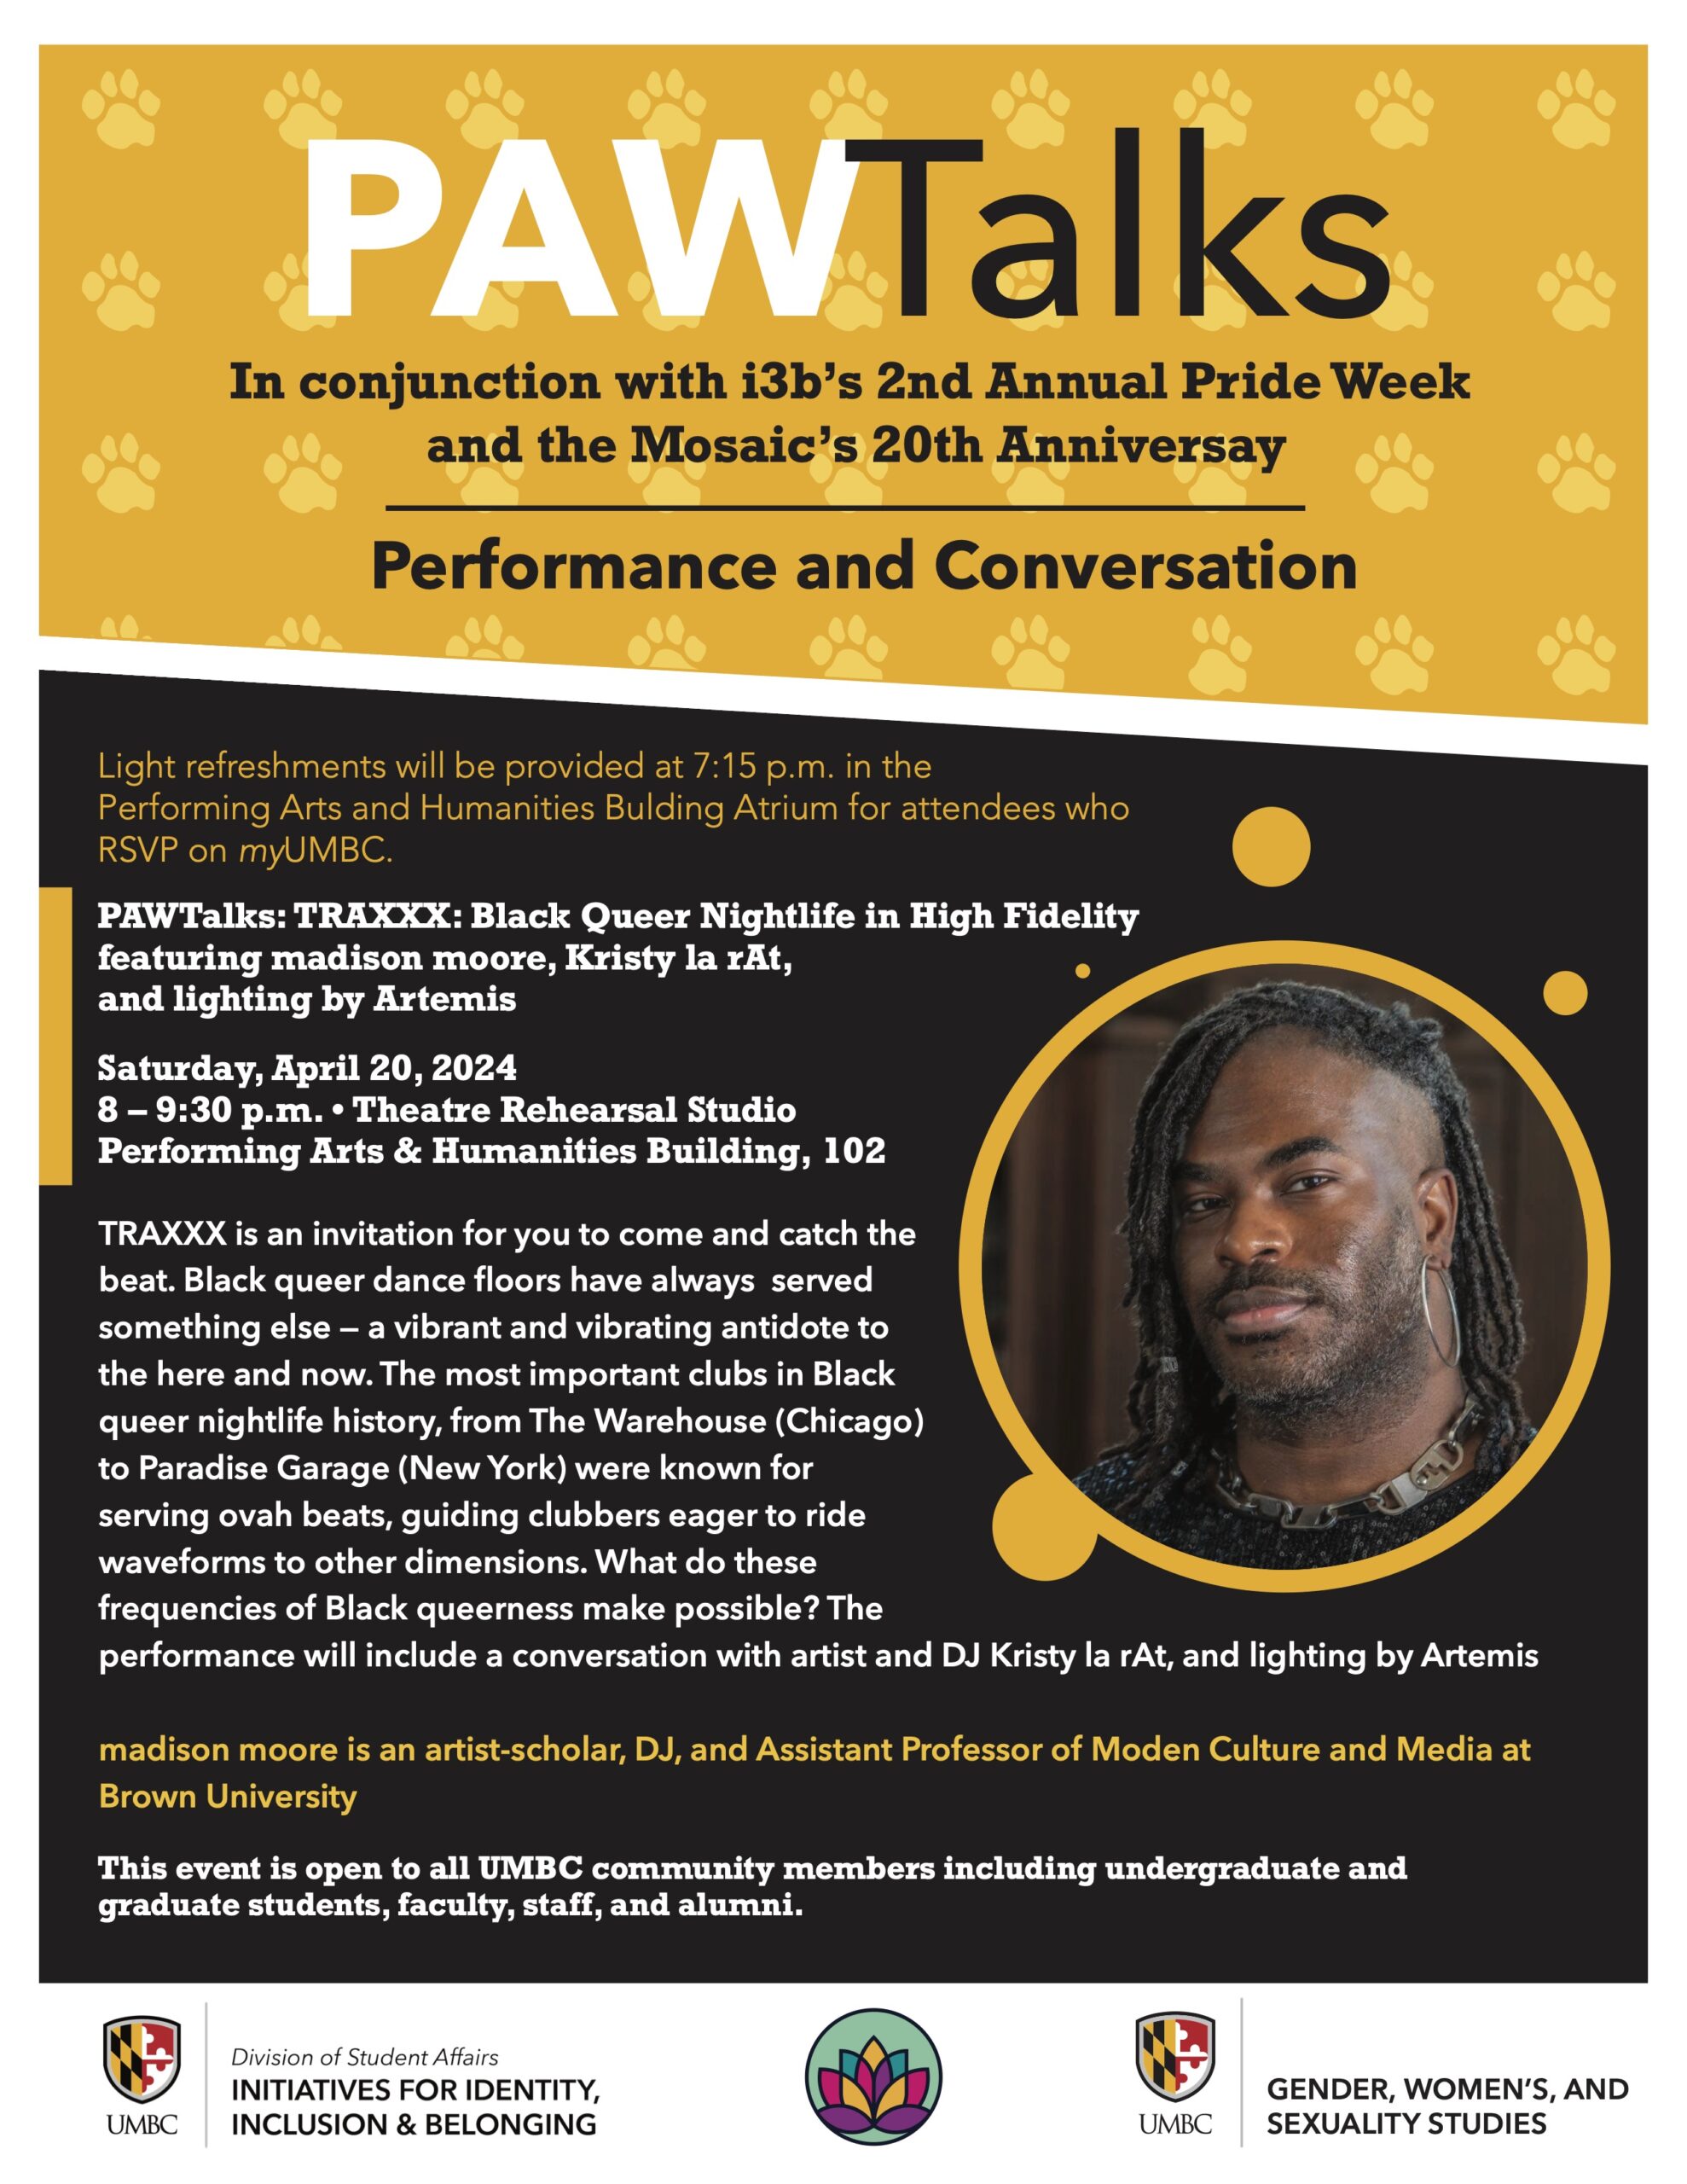 A poster says PAW Talks and a significant amount of information about the event